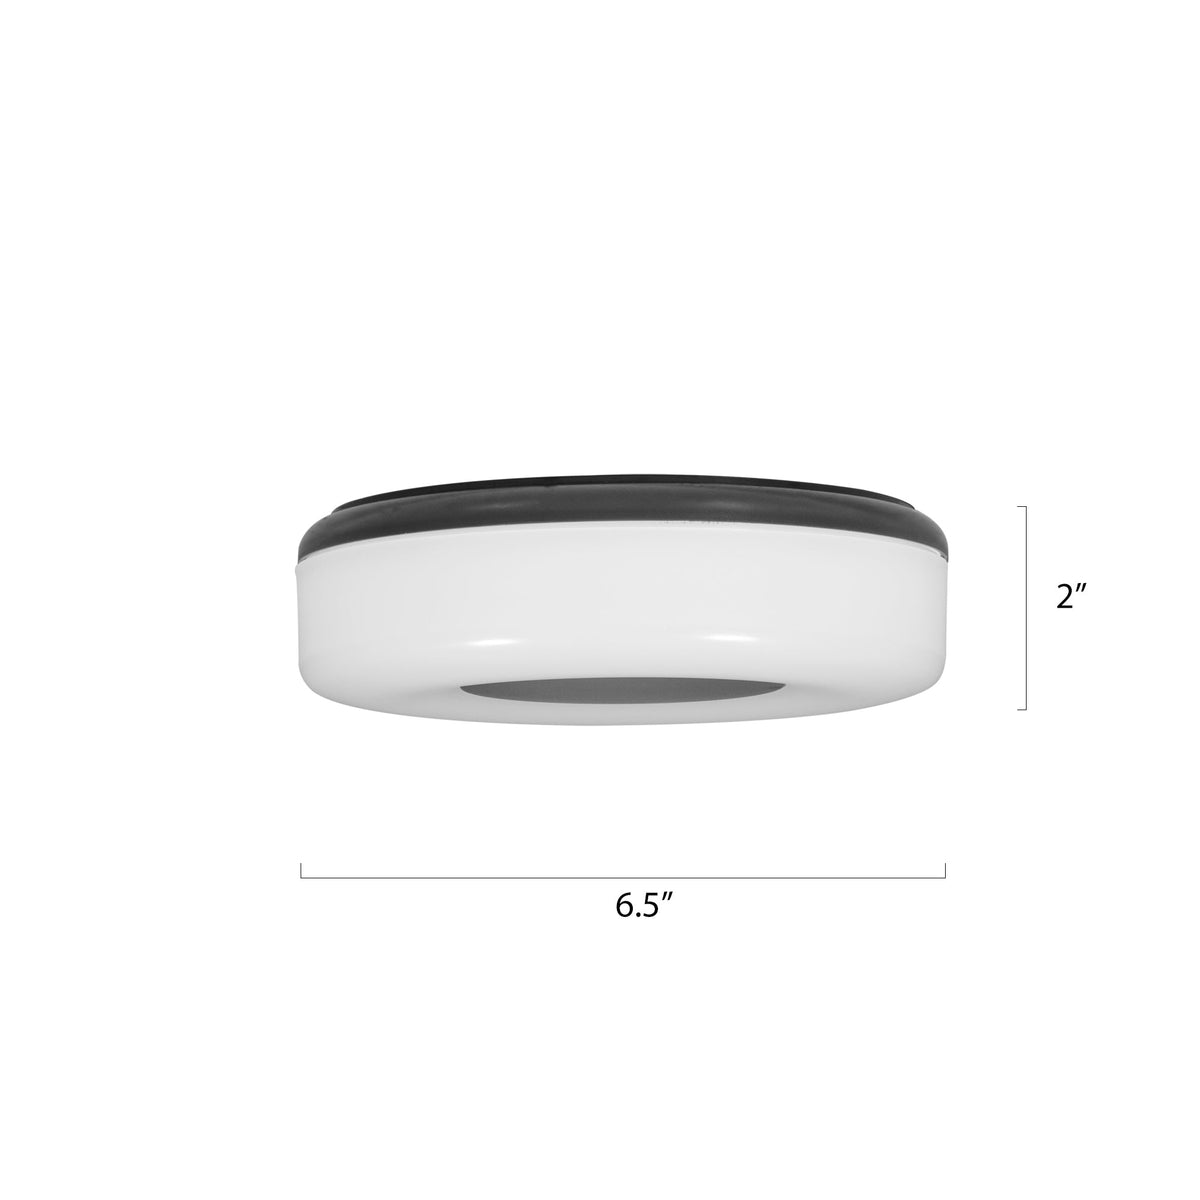 Buy Uncomplicated Small Outdoor LED Ceiling Light showroom